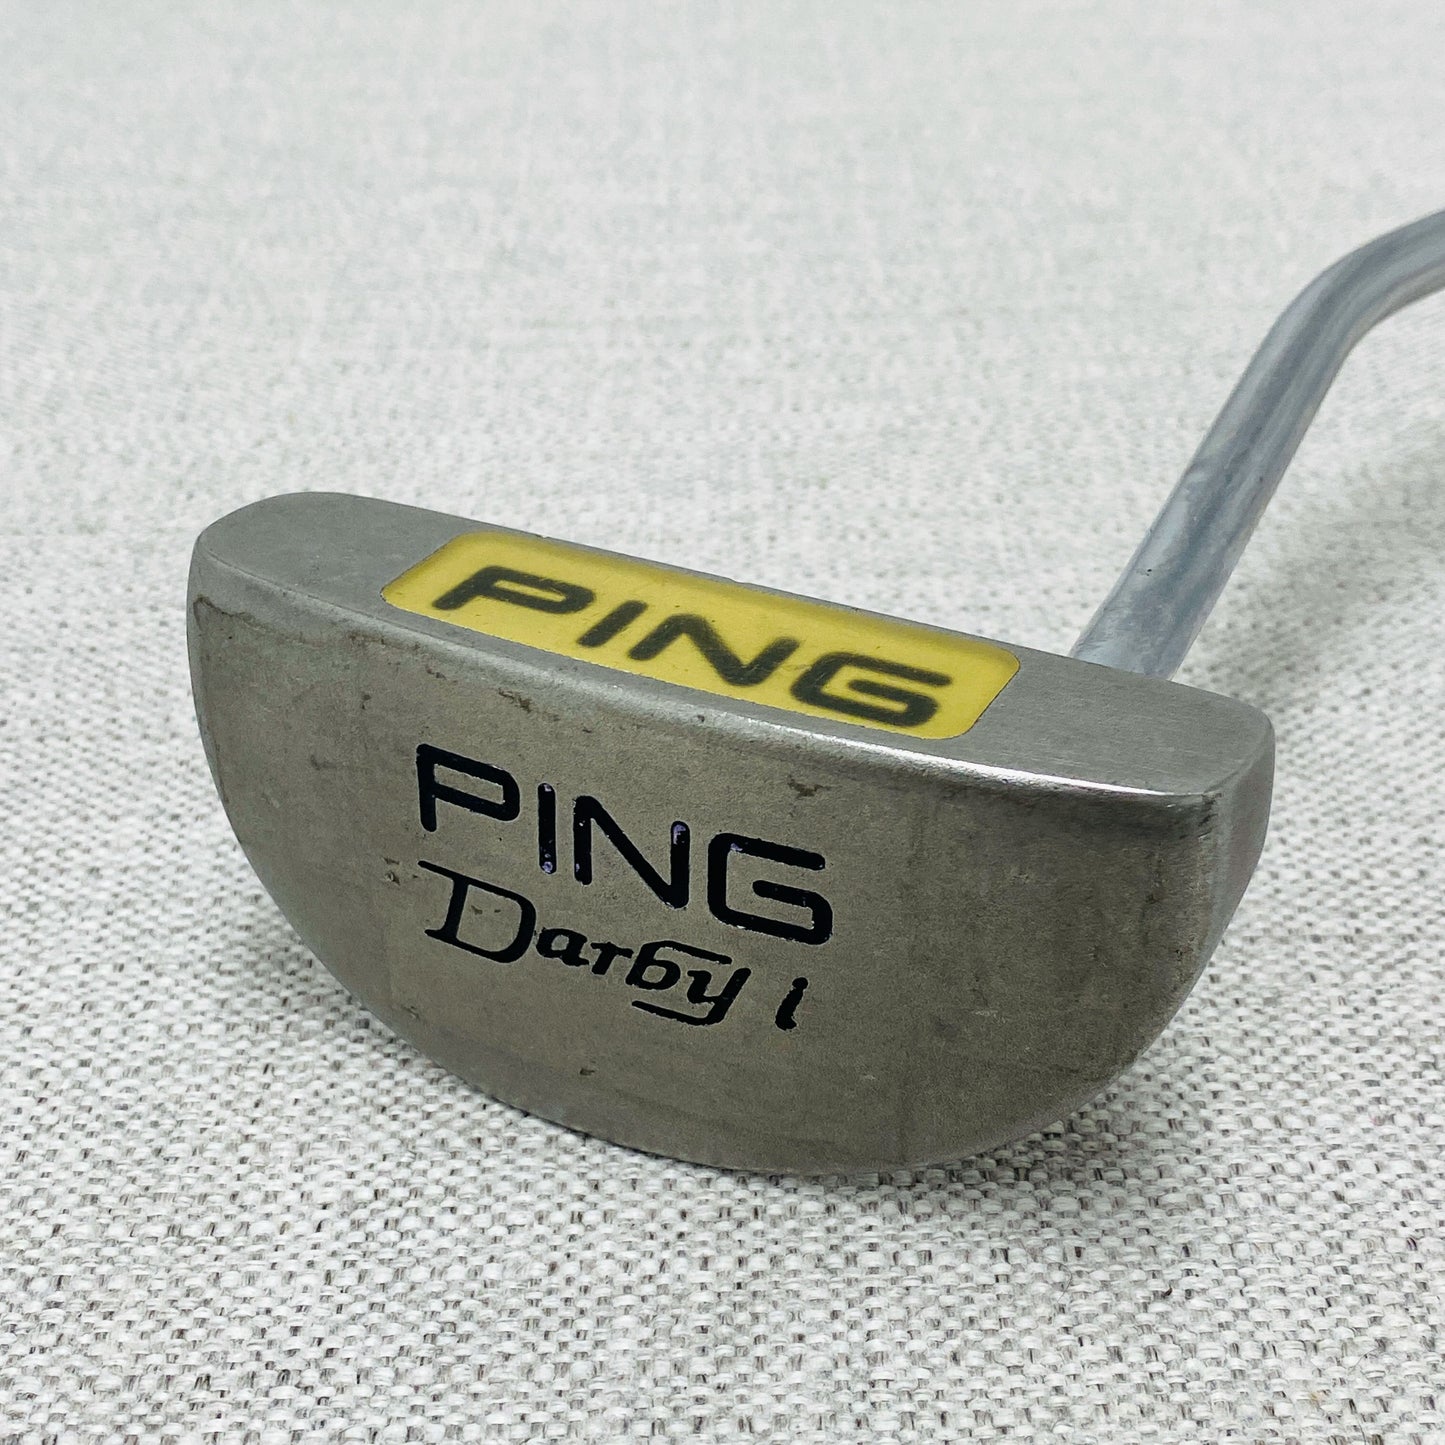 PING Darby-i Putter. 35 inch - Very Good Condition # T1010